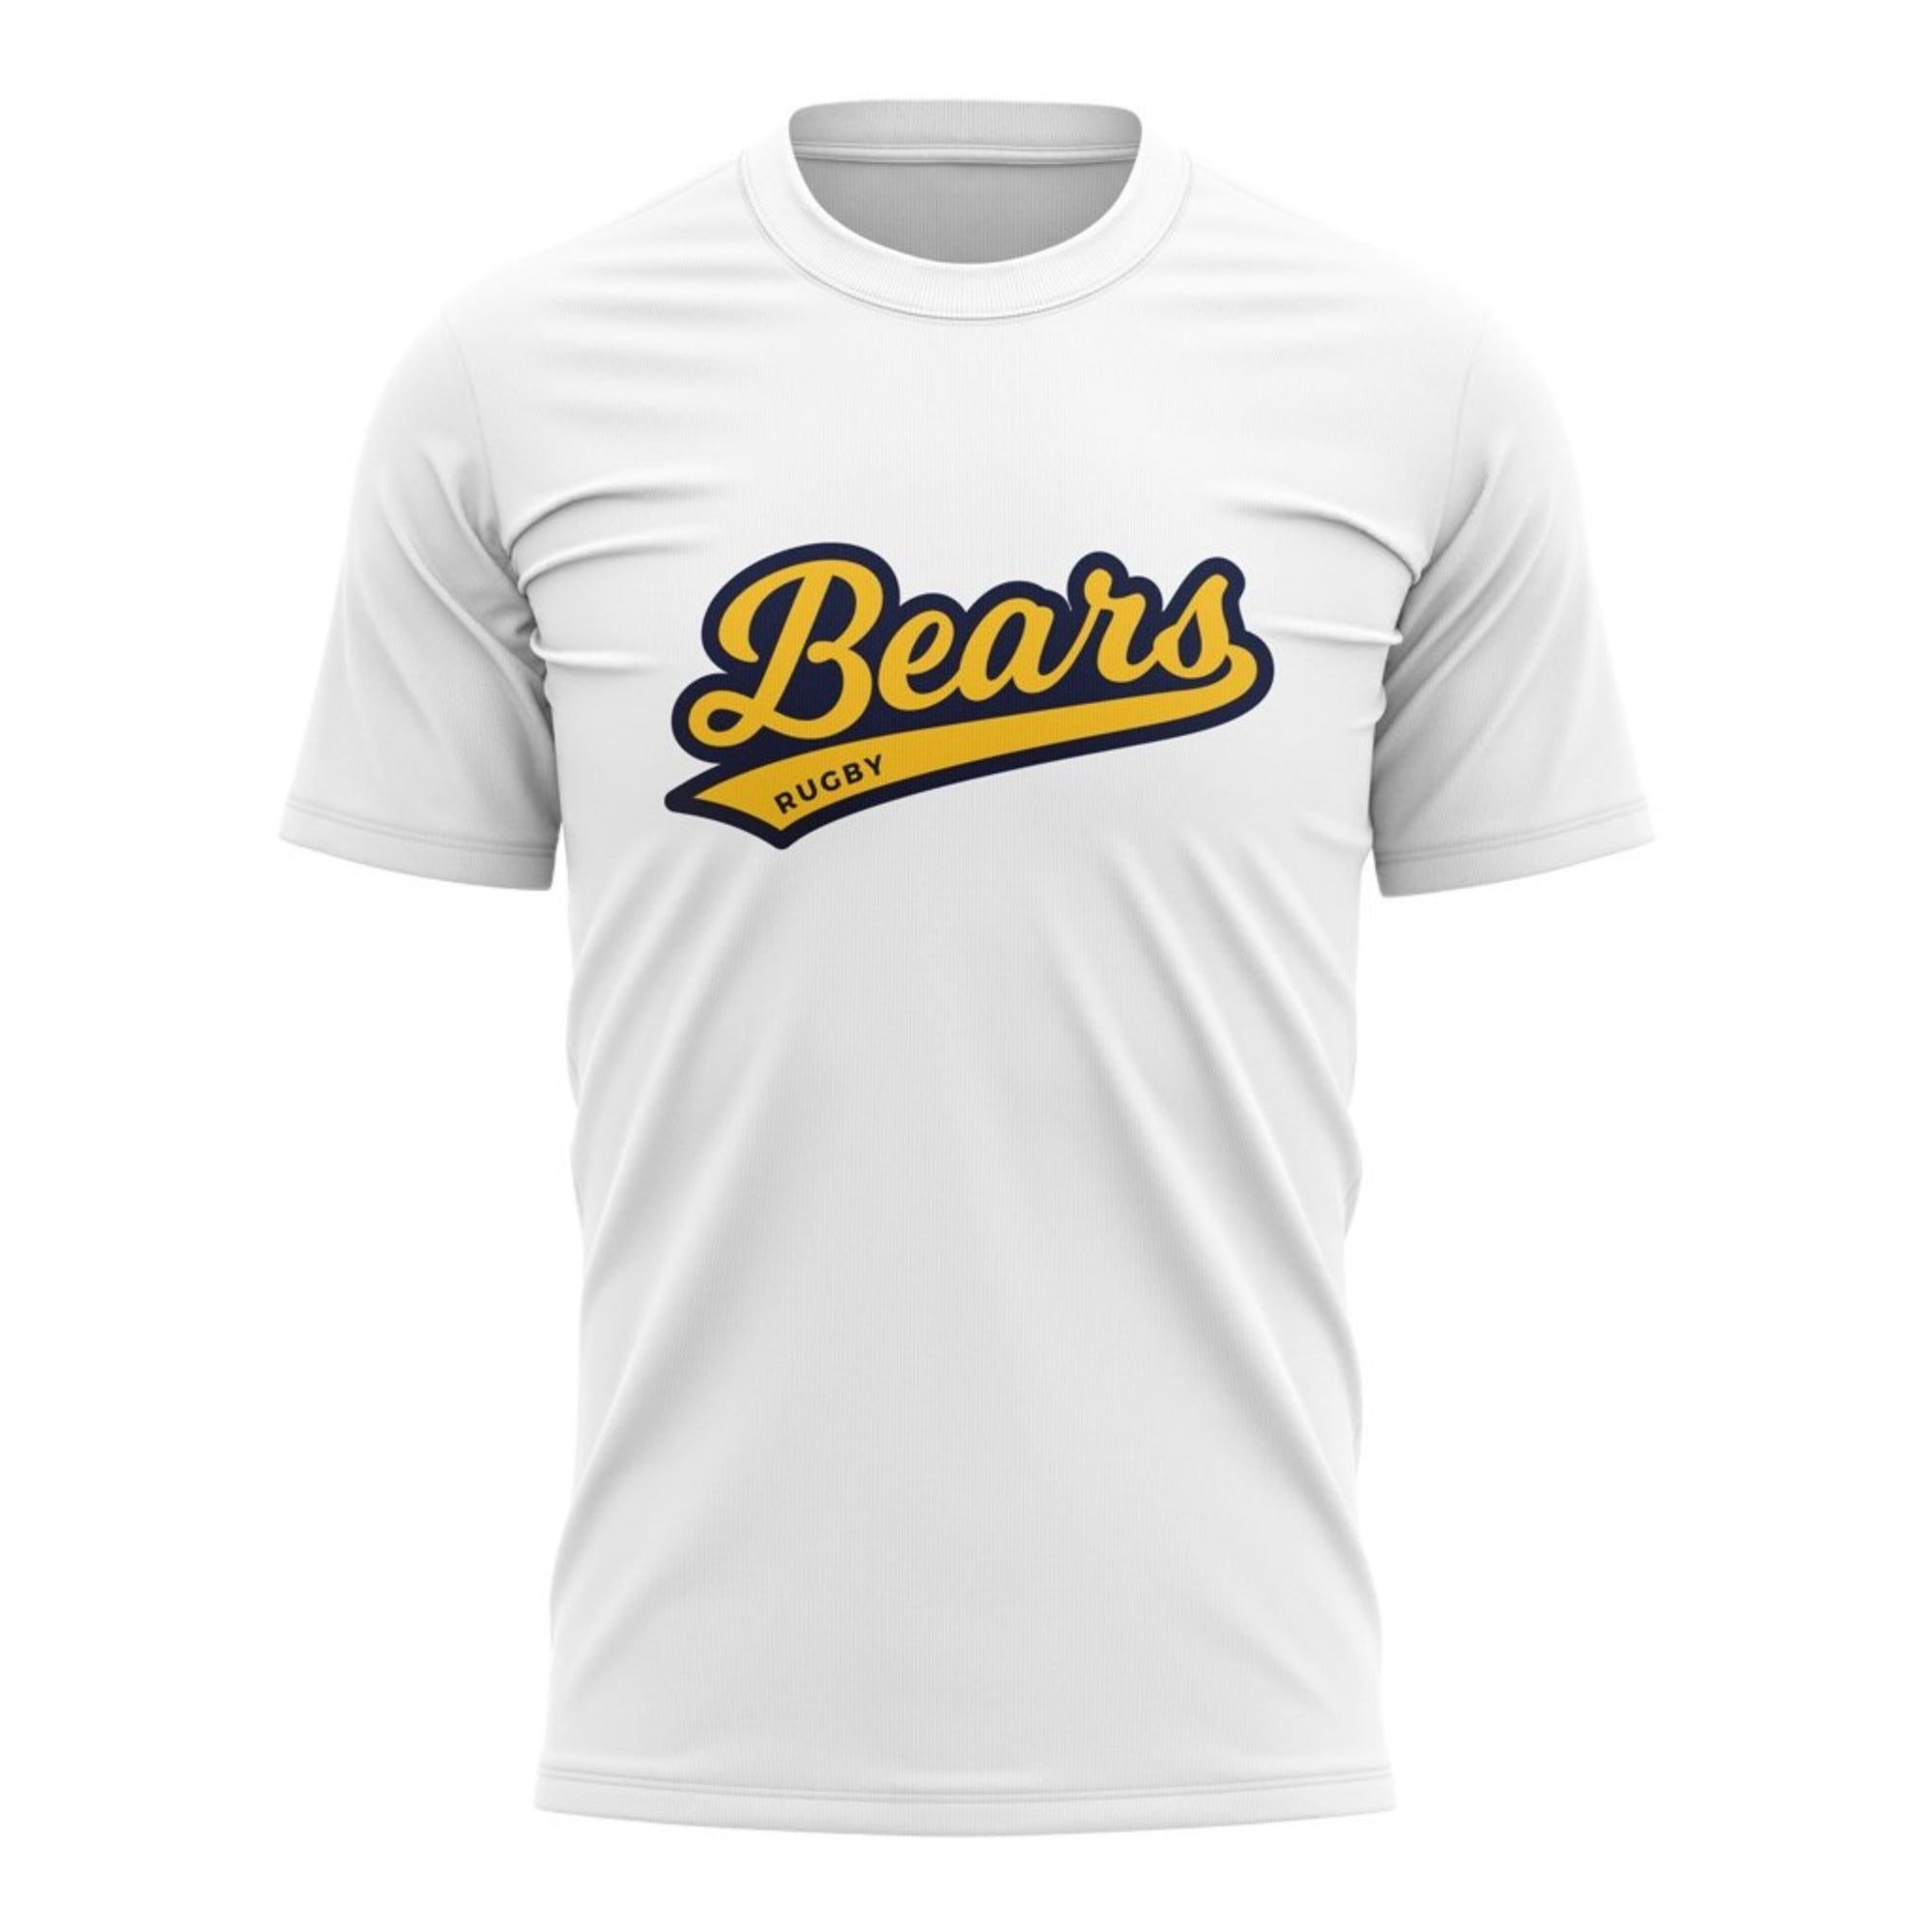 BC Rugby 2021 "Bears" Tee - Men's White/Gold - www.therugbyshop.com www.therugbyshop.com MEN'S / GOLD / S XIX Brands TEES BC Rugby 2021 "Bears" Tee - Men's White/Gold